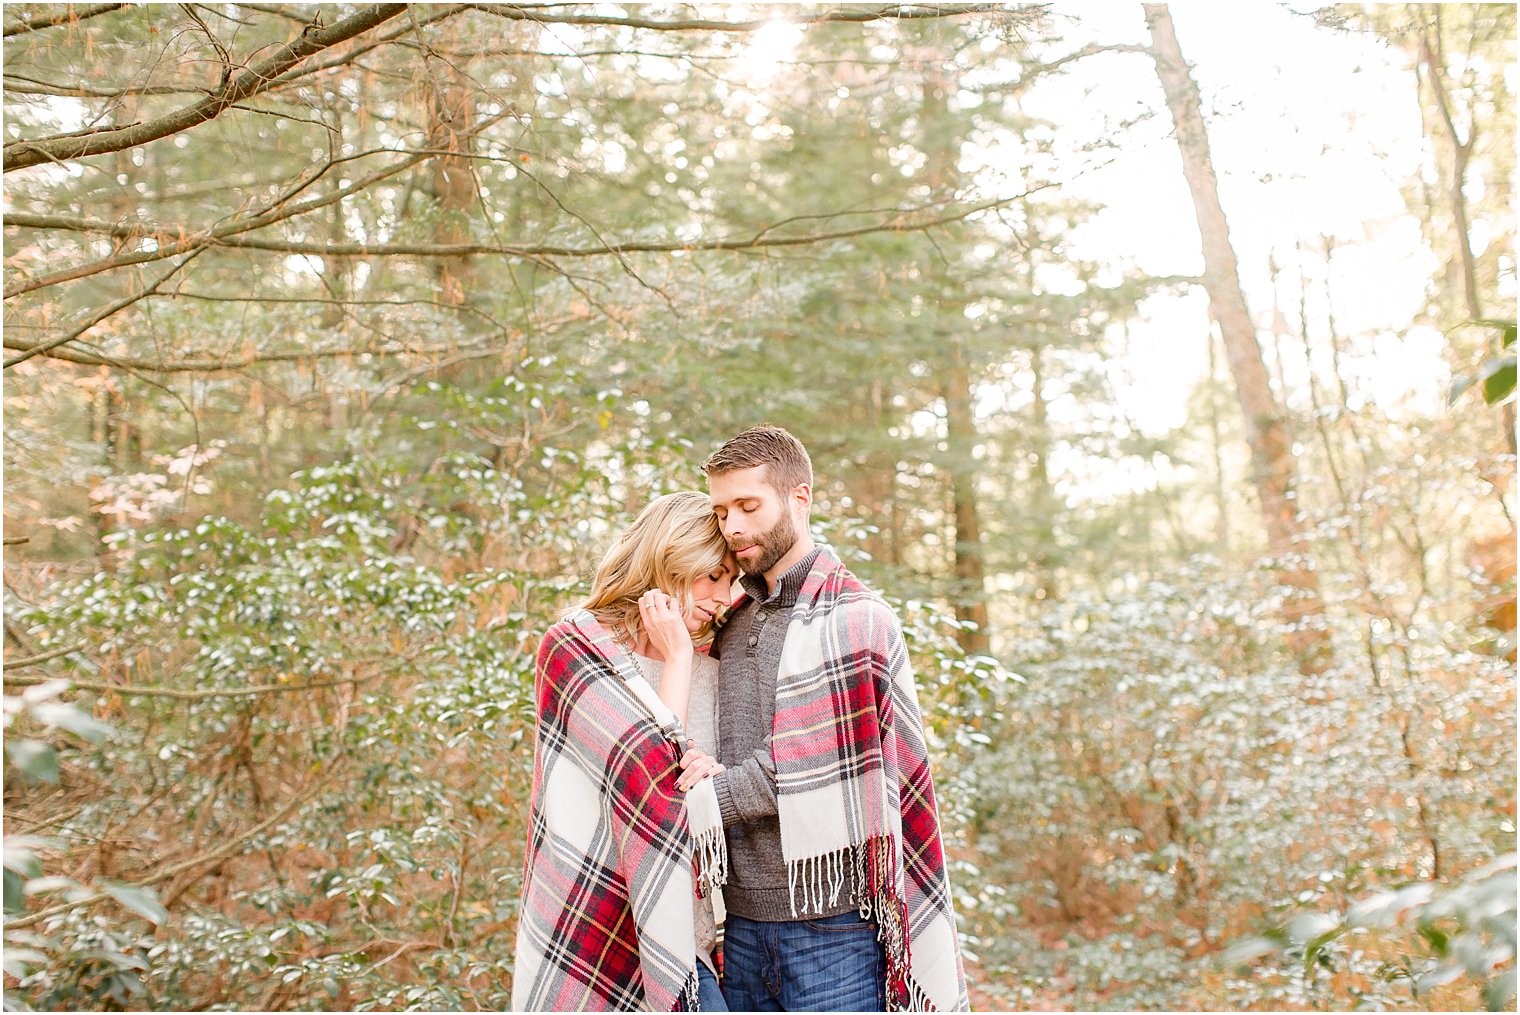 Engagement posing idea with plaid blanket